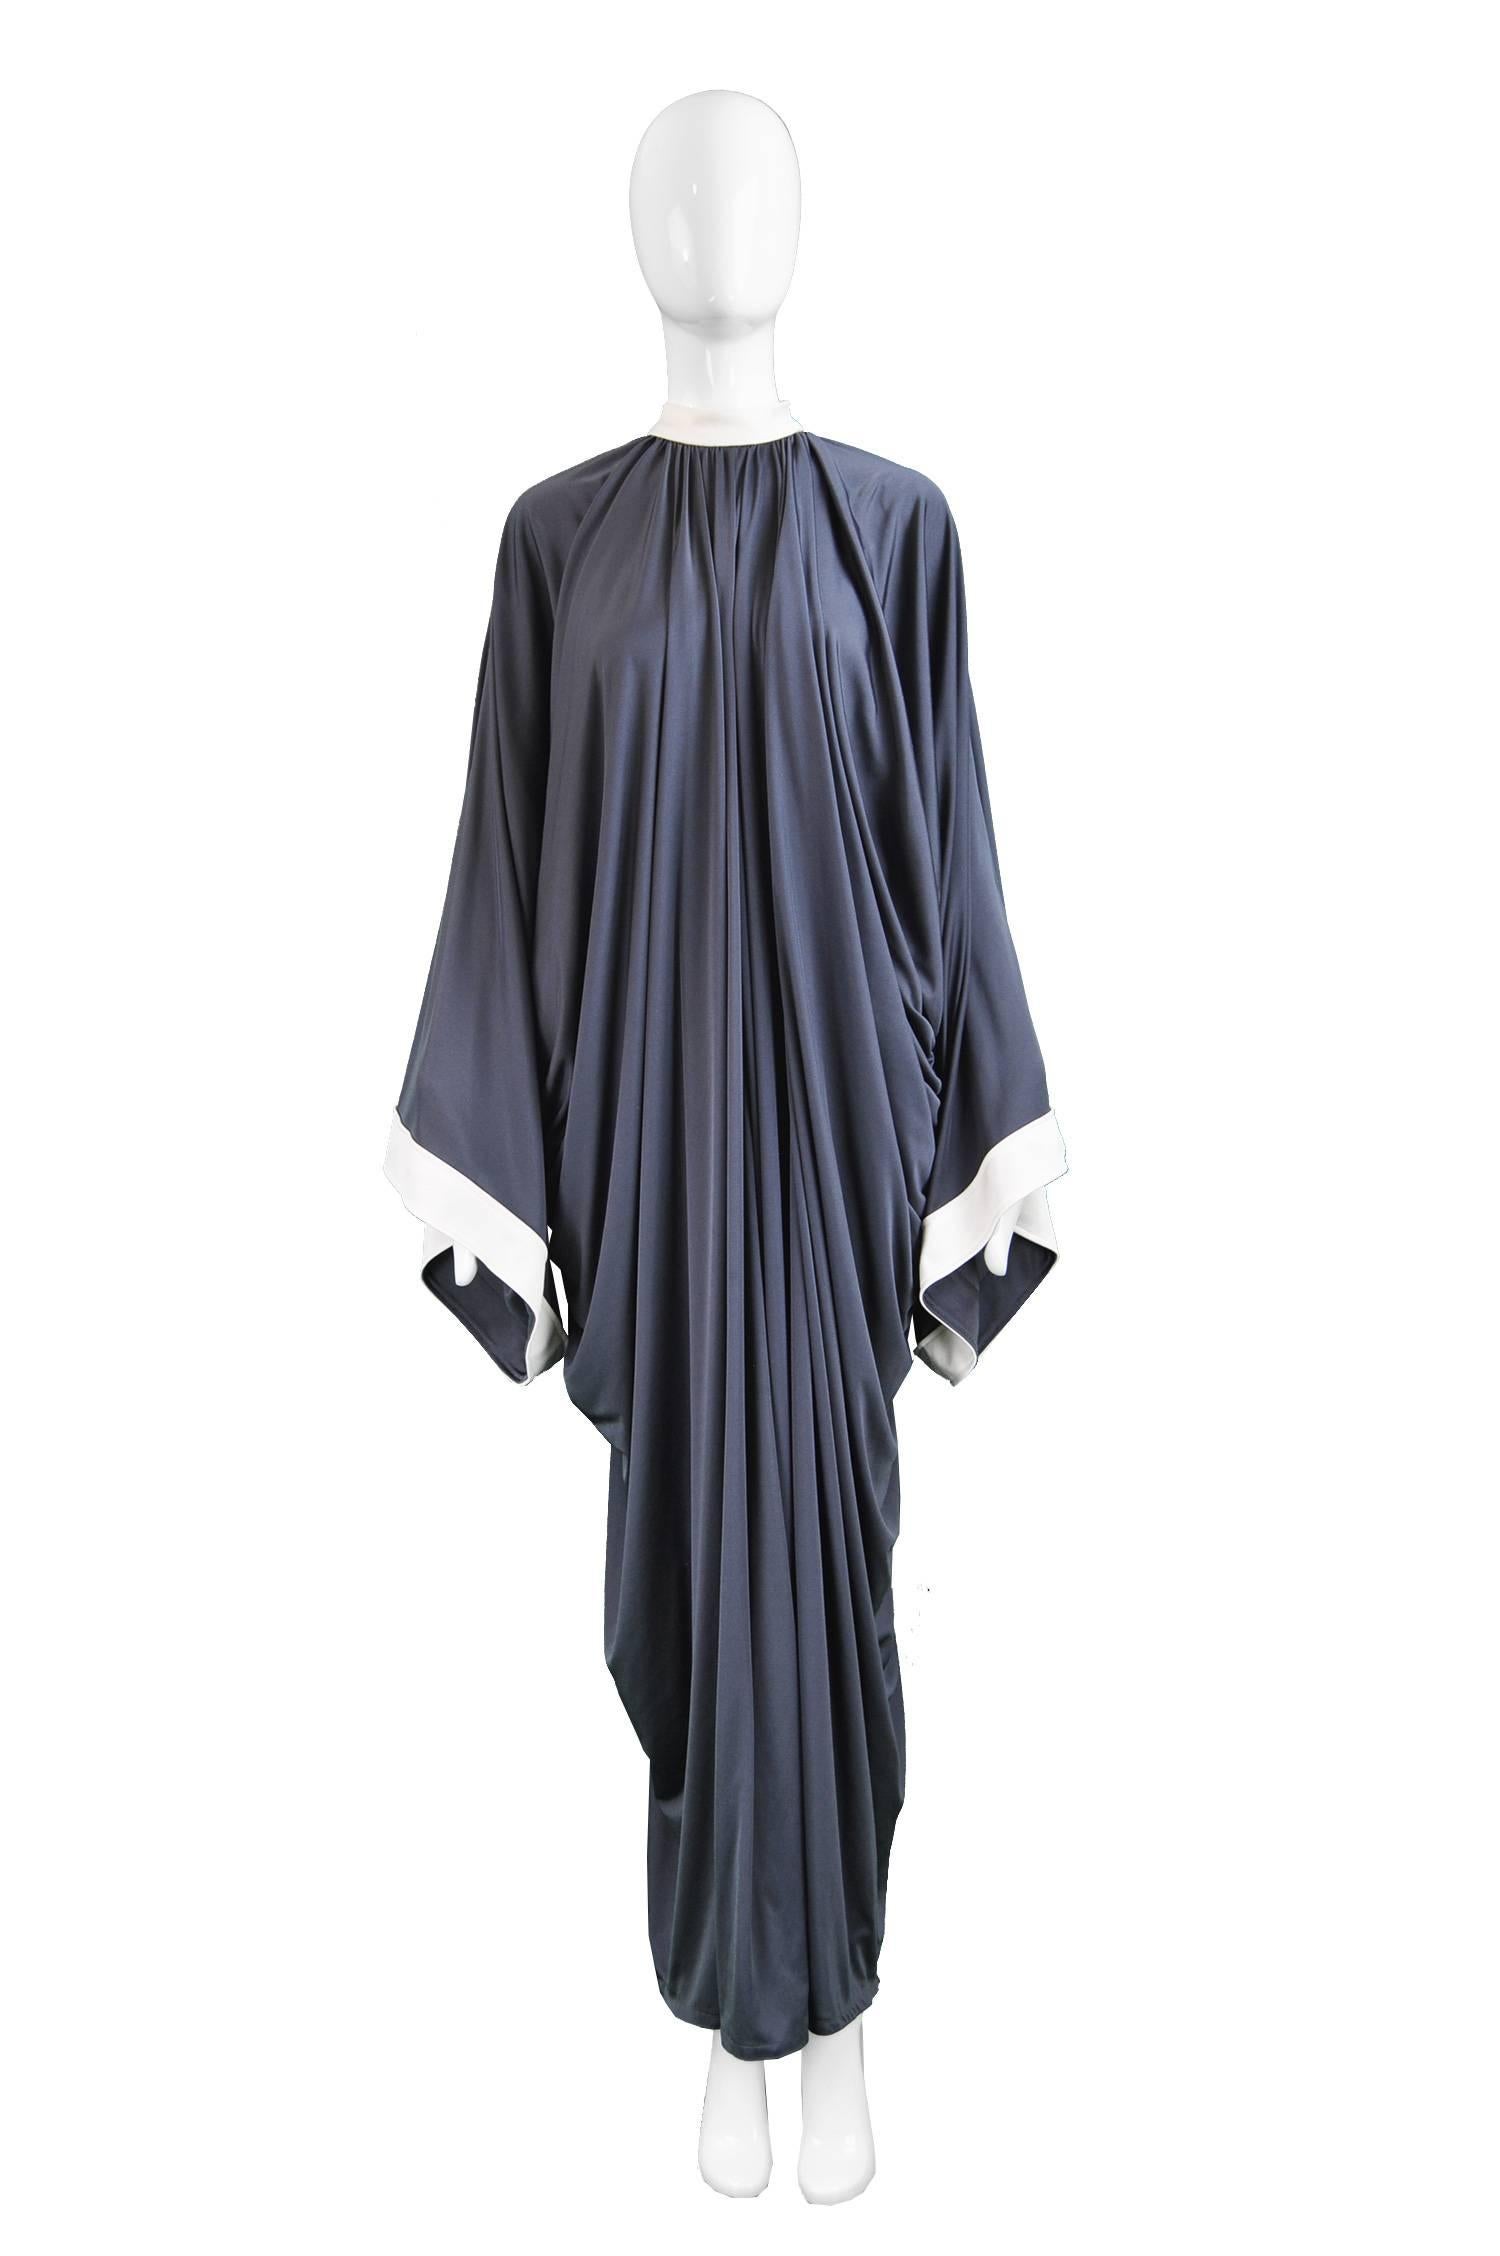 Yuki Draped Jersey Monastic Grey & White Kimono Sleeve Evening Gown, 1970s

Size: One Size Fits All - meant to have a loose, kaftan style fit, as pictured. 
Bust, Waist & Hips - Free
Length (Shoulder to Hem) - 58” / 147cm
 
Condition: Excellent